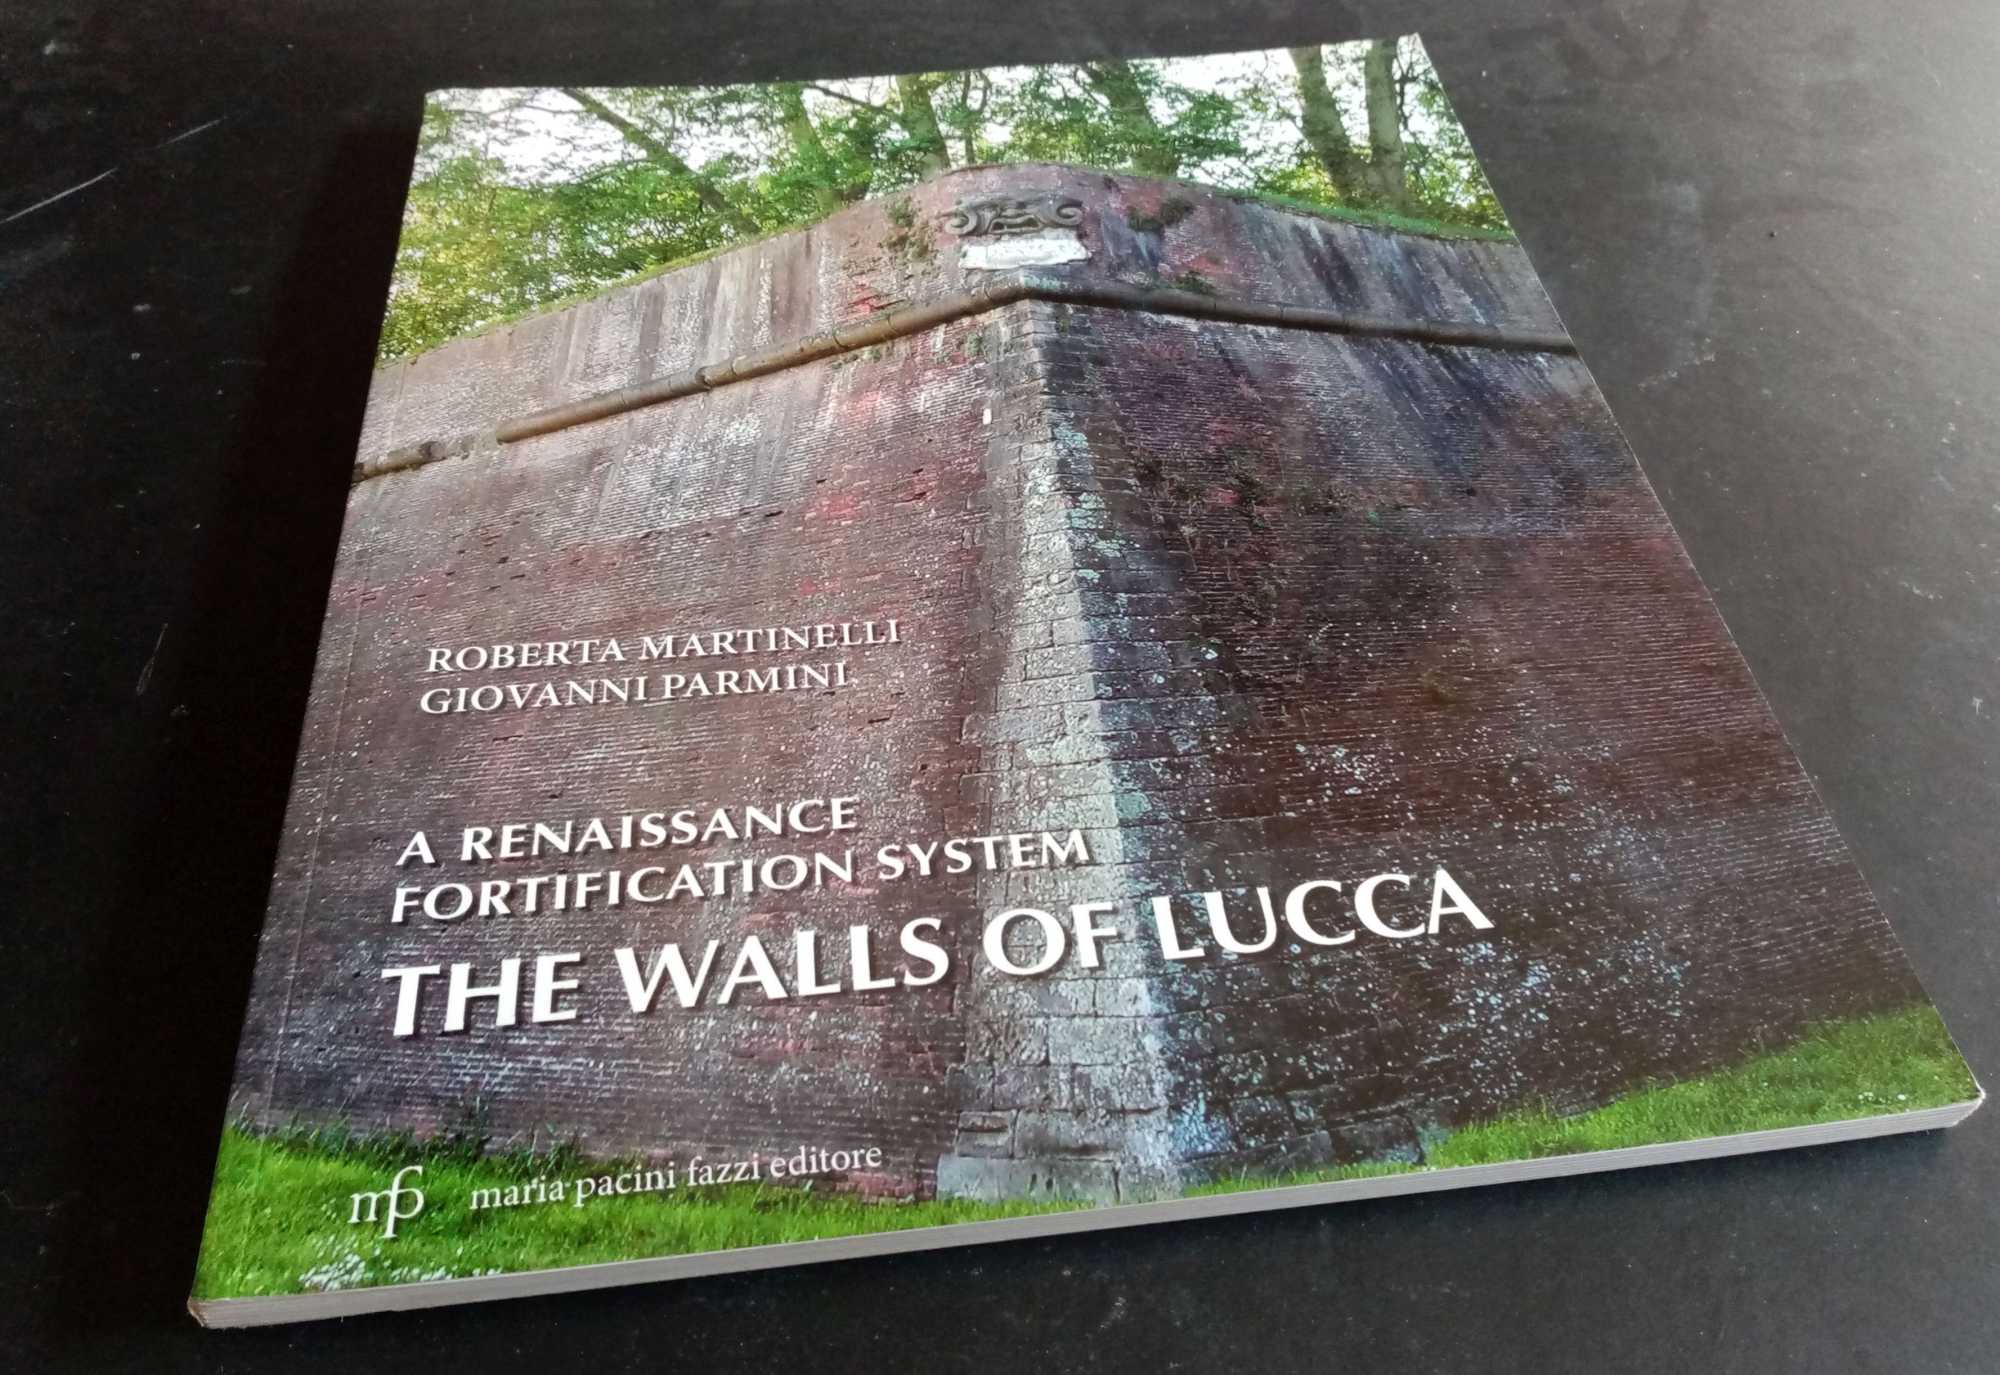 Roberta Martinelli - A Renaissance Fortification System: the Walls of Lucca